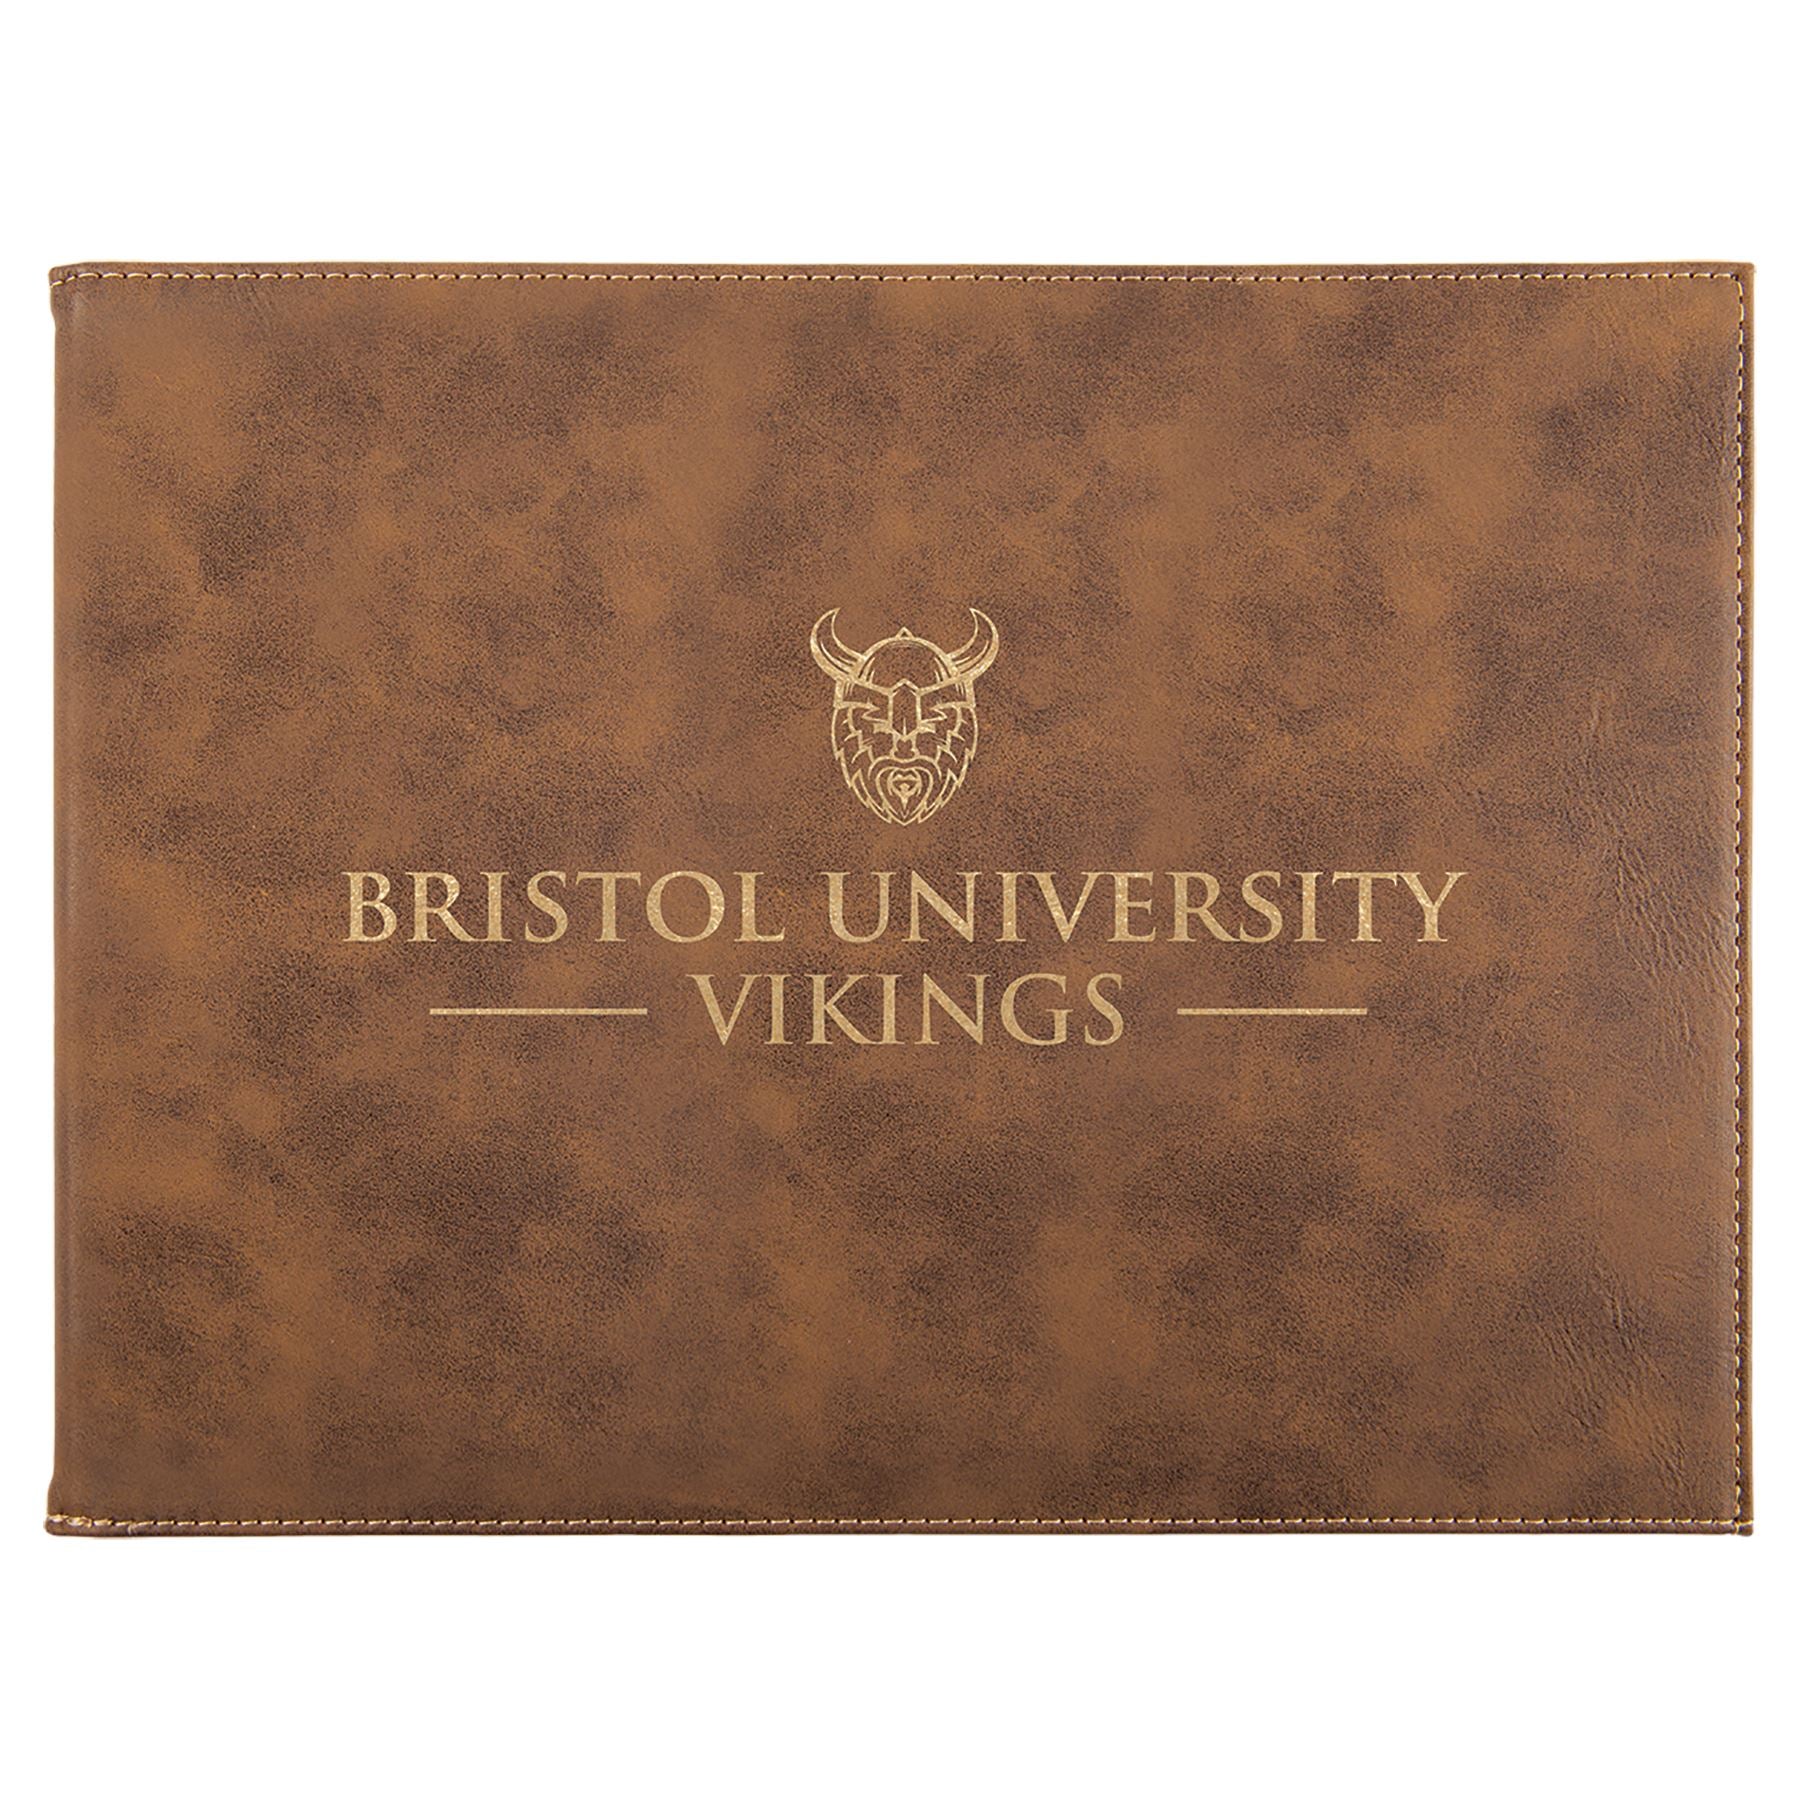 Certificate/Diploma Holder 9" x 12" (Holds 8 1/2" x 11" Document), Laserable Leatherette Certificate Holder Craftworks NW Rustic/Gold 